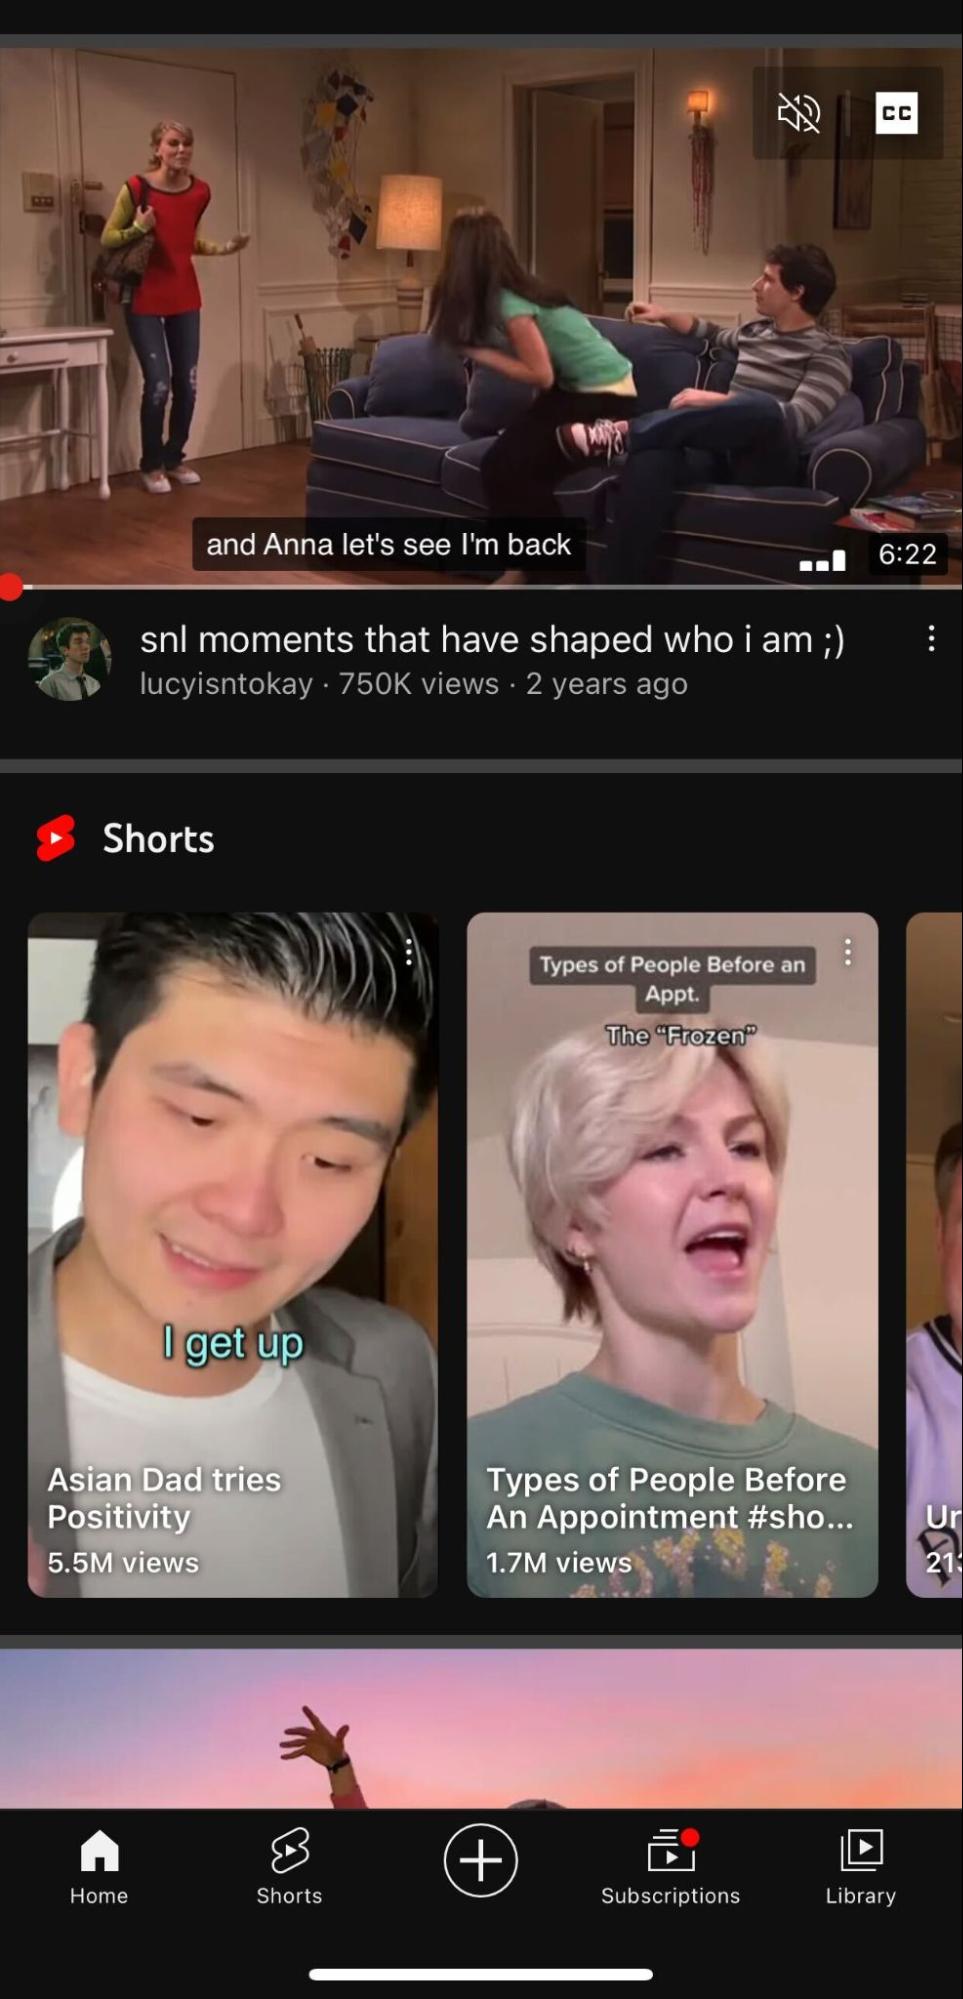 An example of what YouTube looks like in mobile view